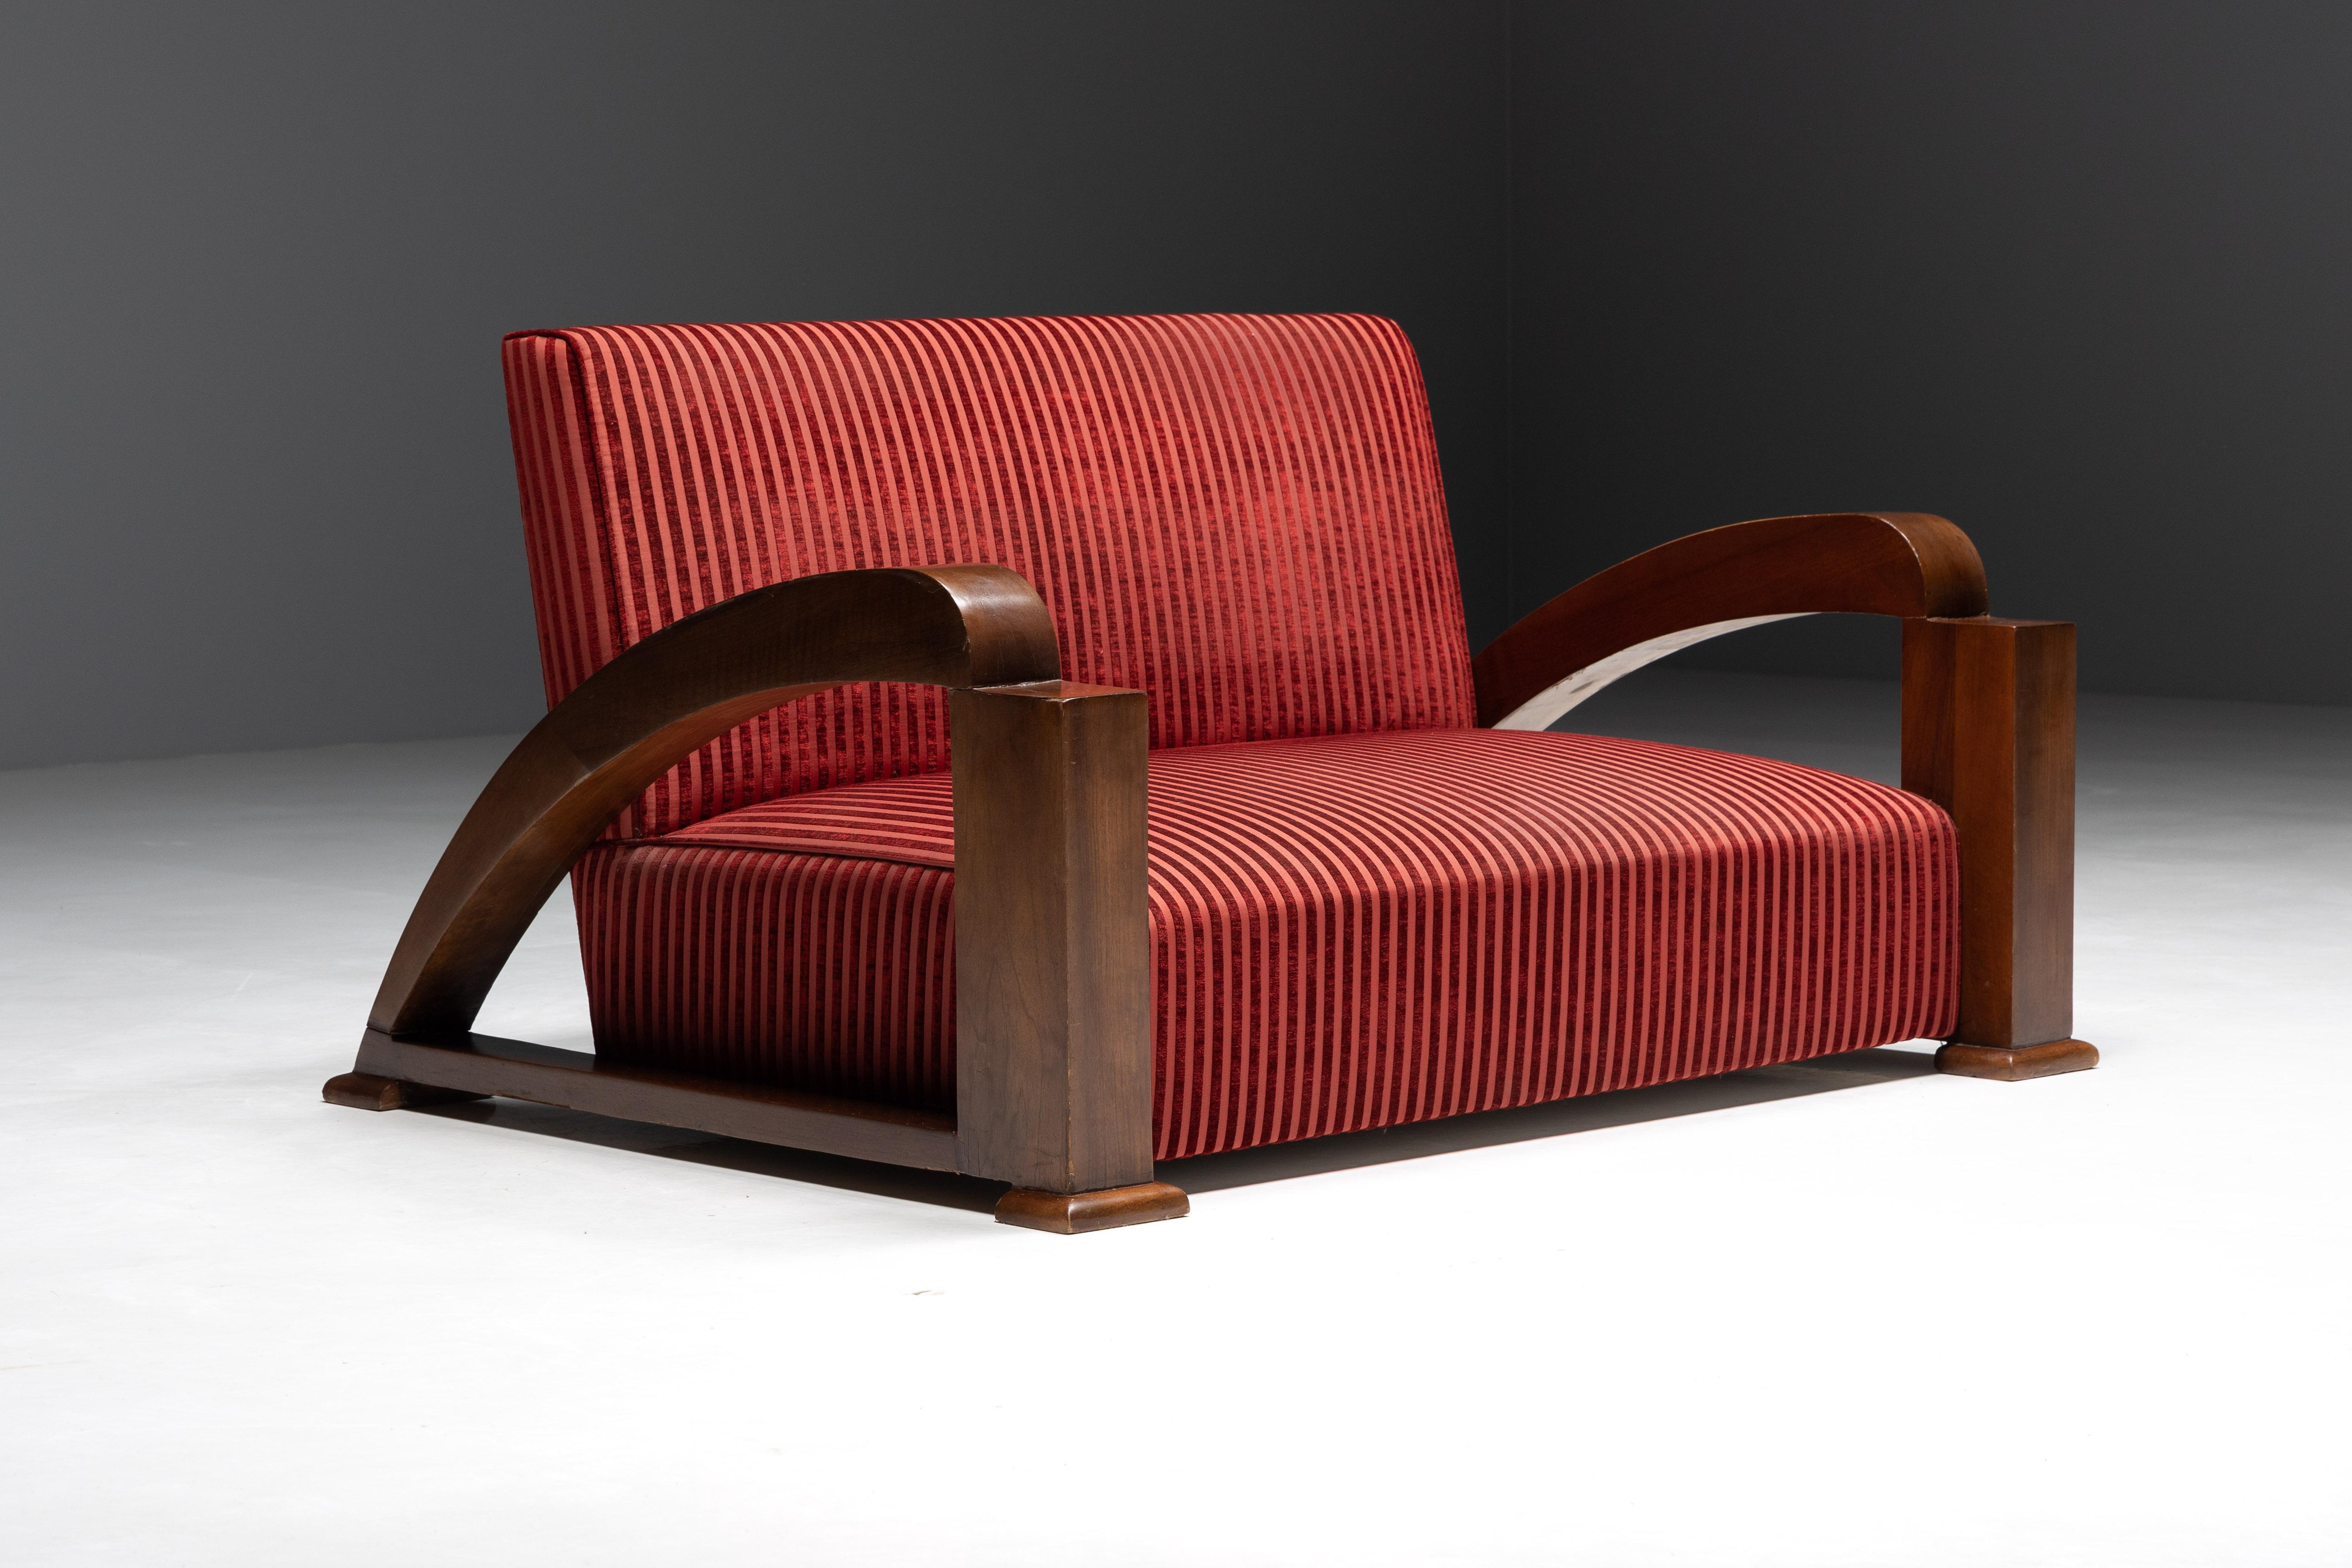 Mid-20th Century Art Deco Sofa in Red Striped Velvet and with Swoosh Armrests, France, 1940s For Sale